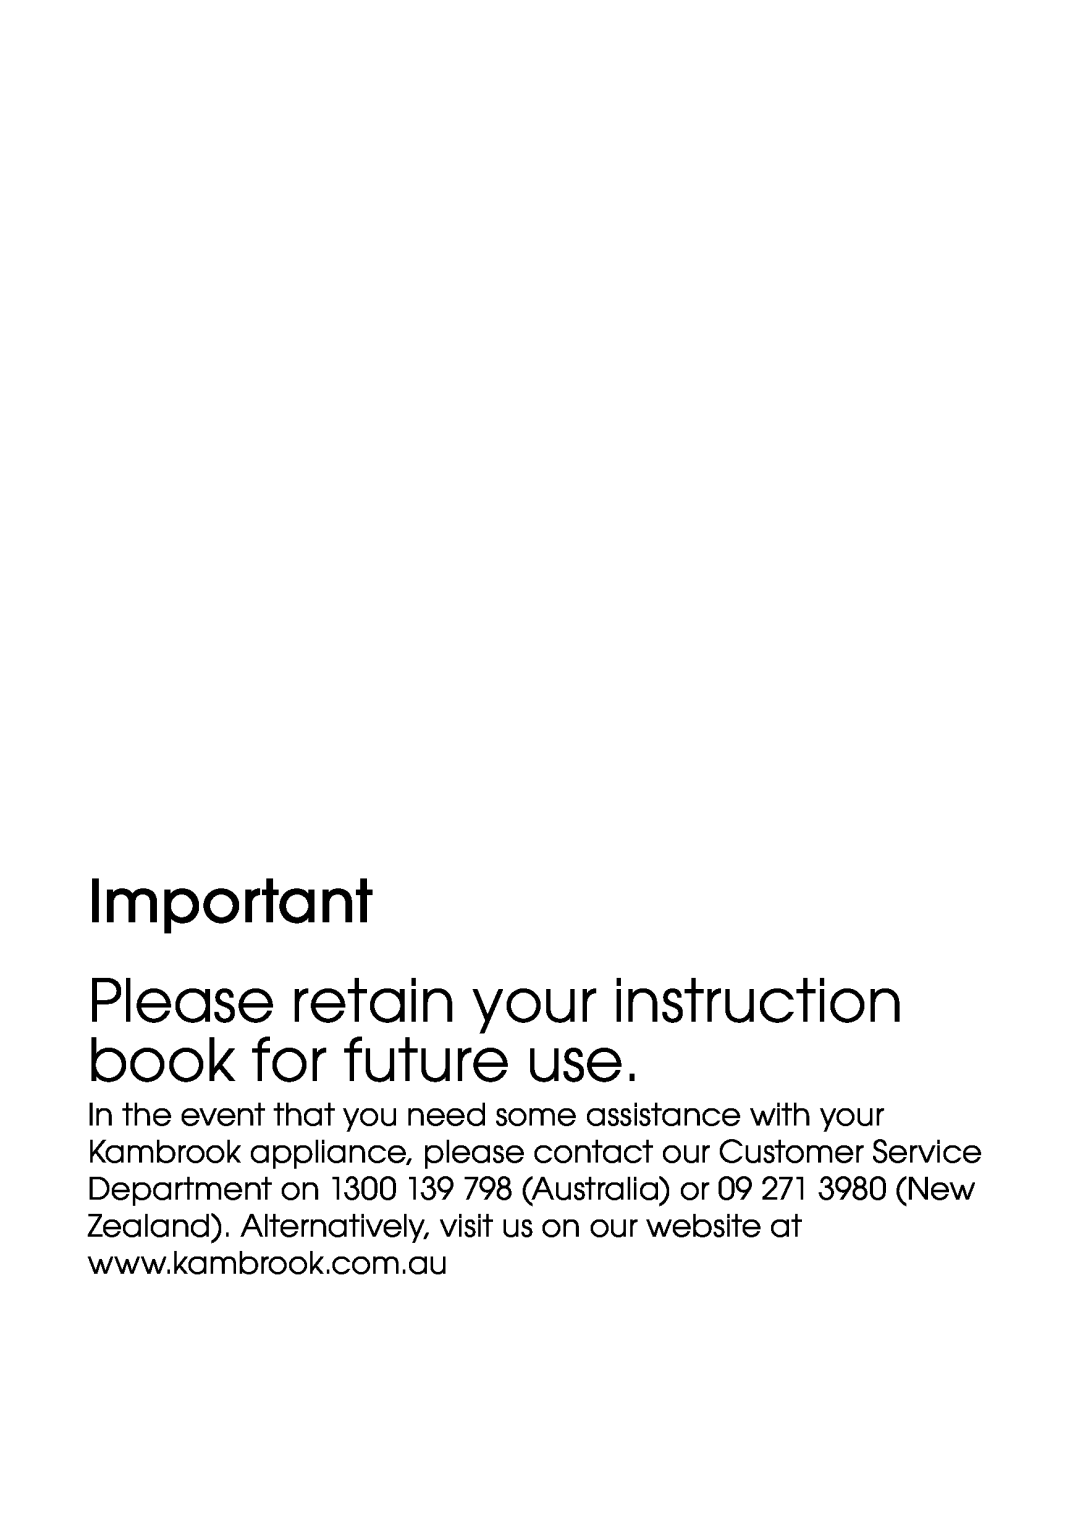 Kambrook KDM1 manual Please retain your instruction book for future use 